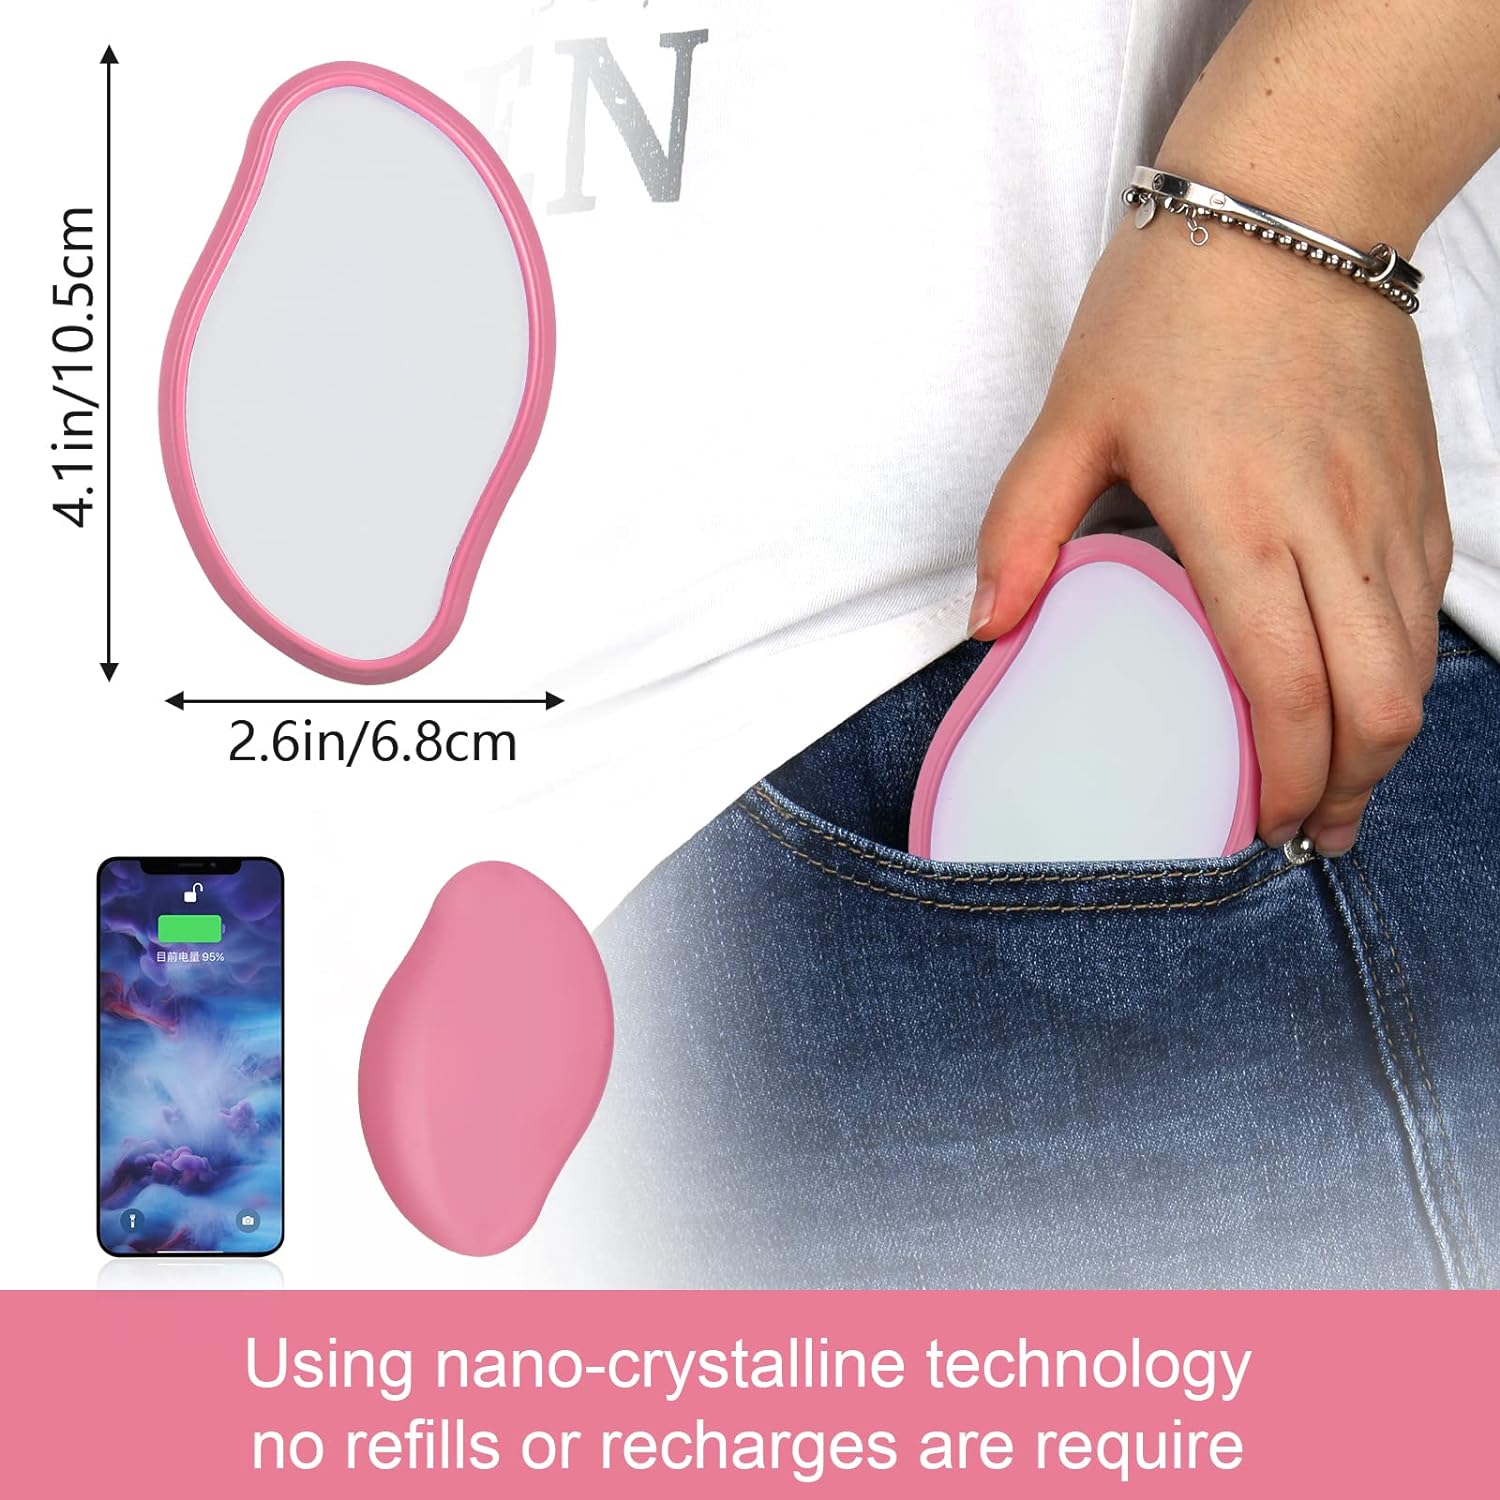 Wholesale prices with free shipping all over United States Crystal Hair Eraser,Reusable Crystal Hair Remover Magic Painless Exfoliation Hair Removal Tool, Magic Hair Eraser for Back Arms Legs Fast & Easy Crystal Hair Eraser for Women and Men (Pink) - Steven Deals